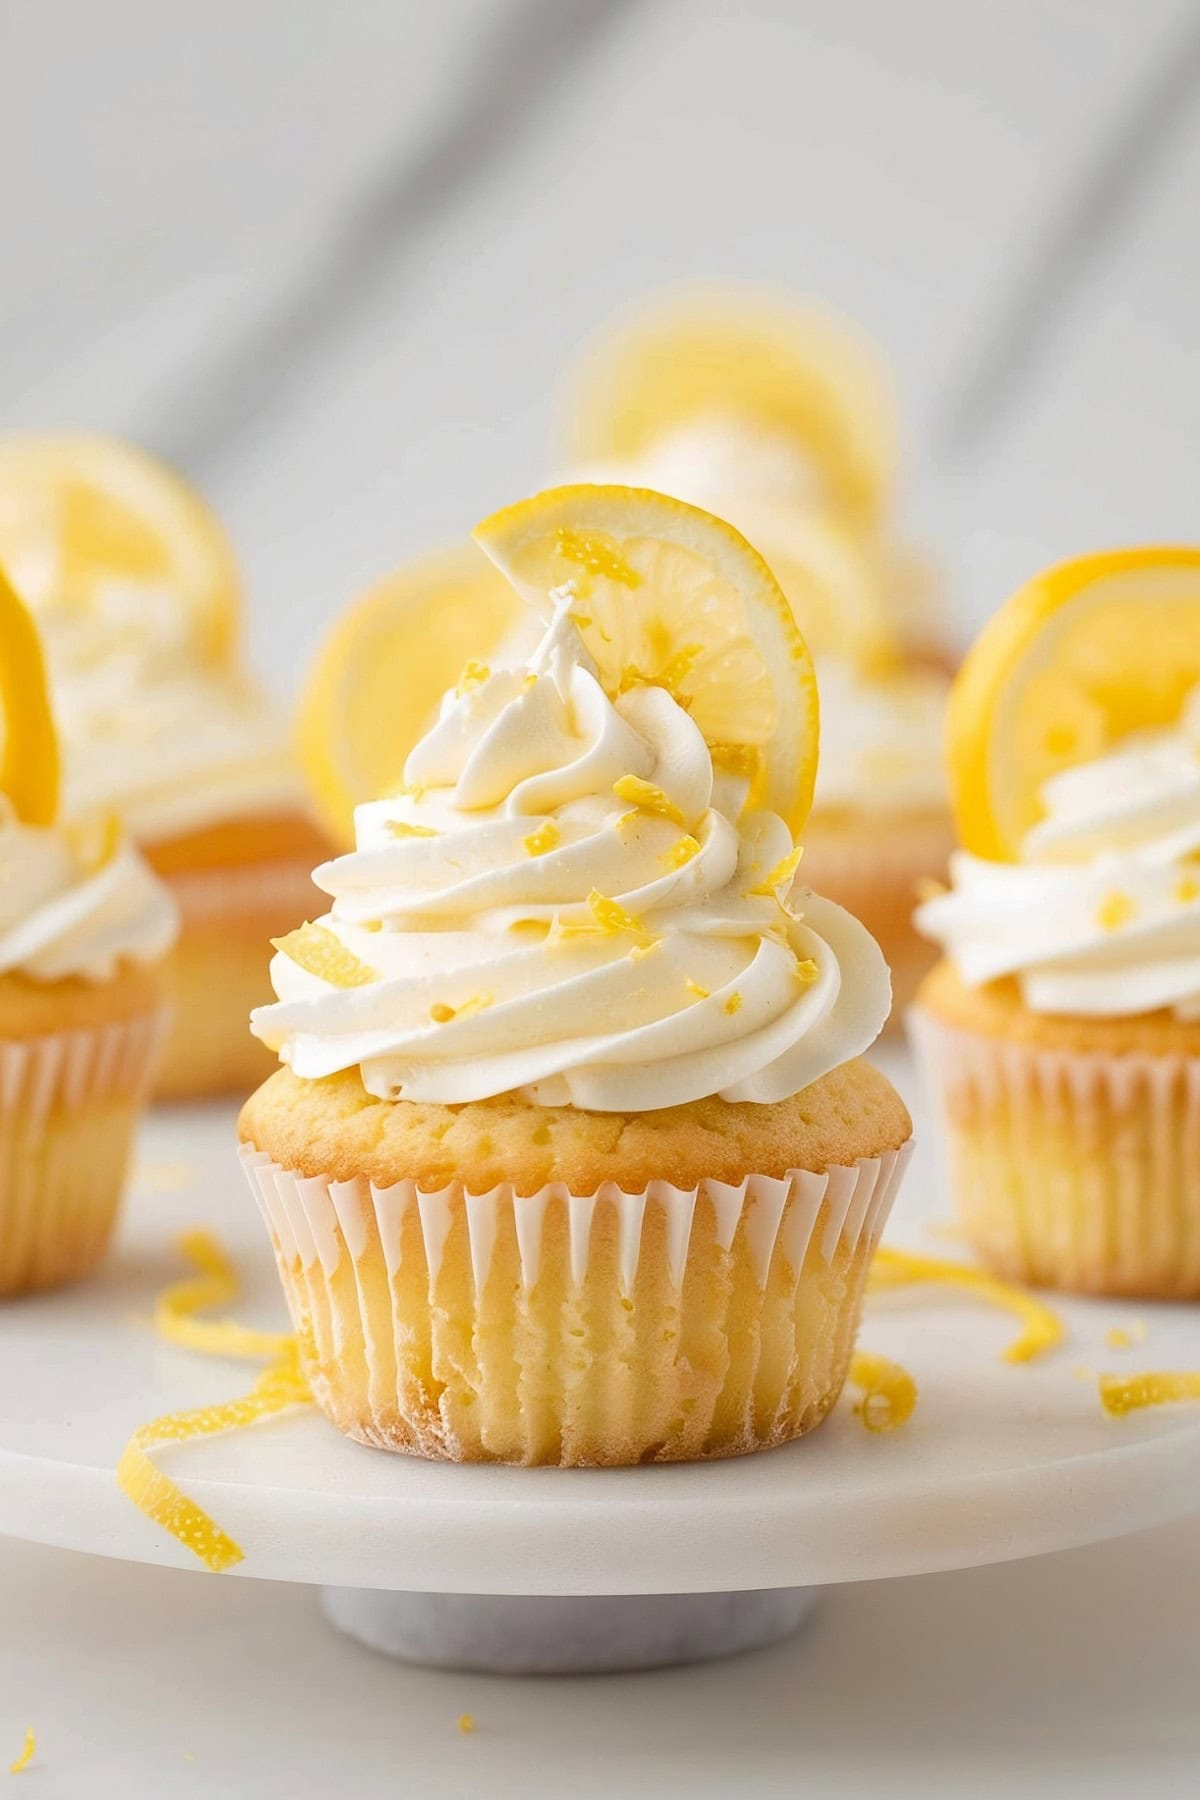 Homemade lemon cupcakes, baked to perfection and topped with a swirl of tangy cream cheese frosting